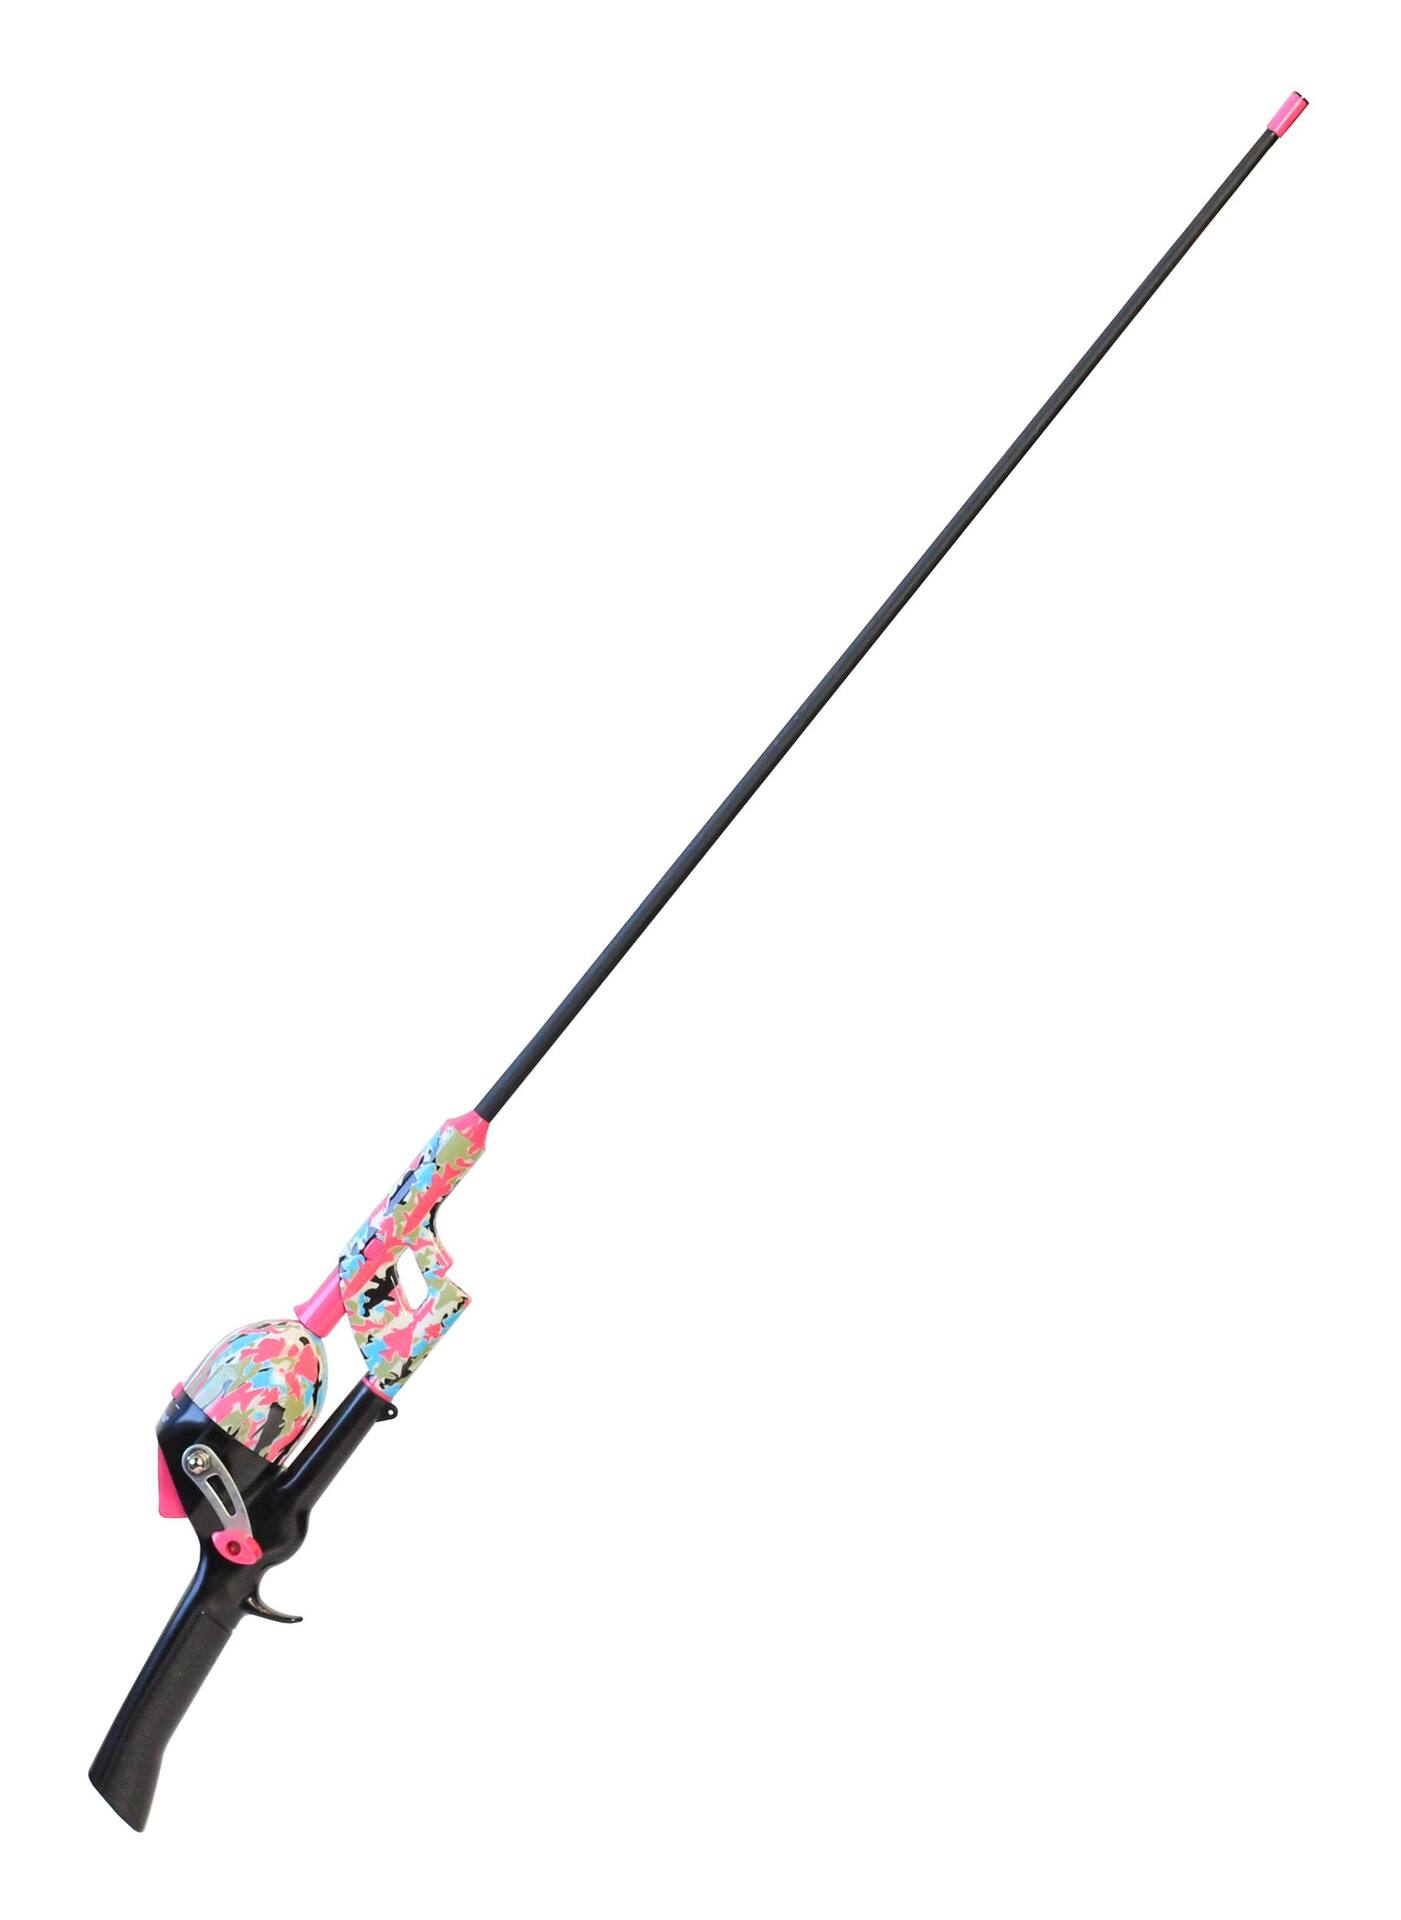 Simply Fishing Youth Spincast Fishing Rod and Reel Combo with Tackle Kit,  Pre-Spooled, Light, 3.8-ft